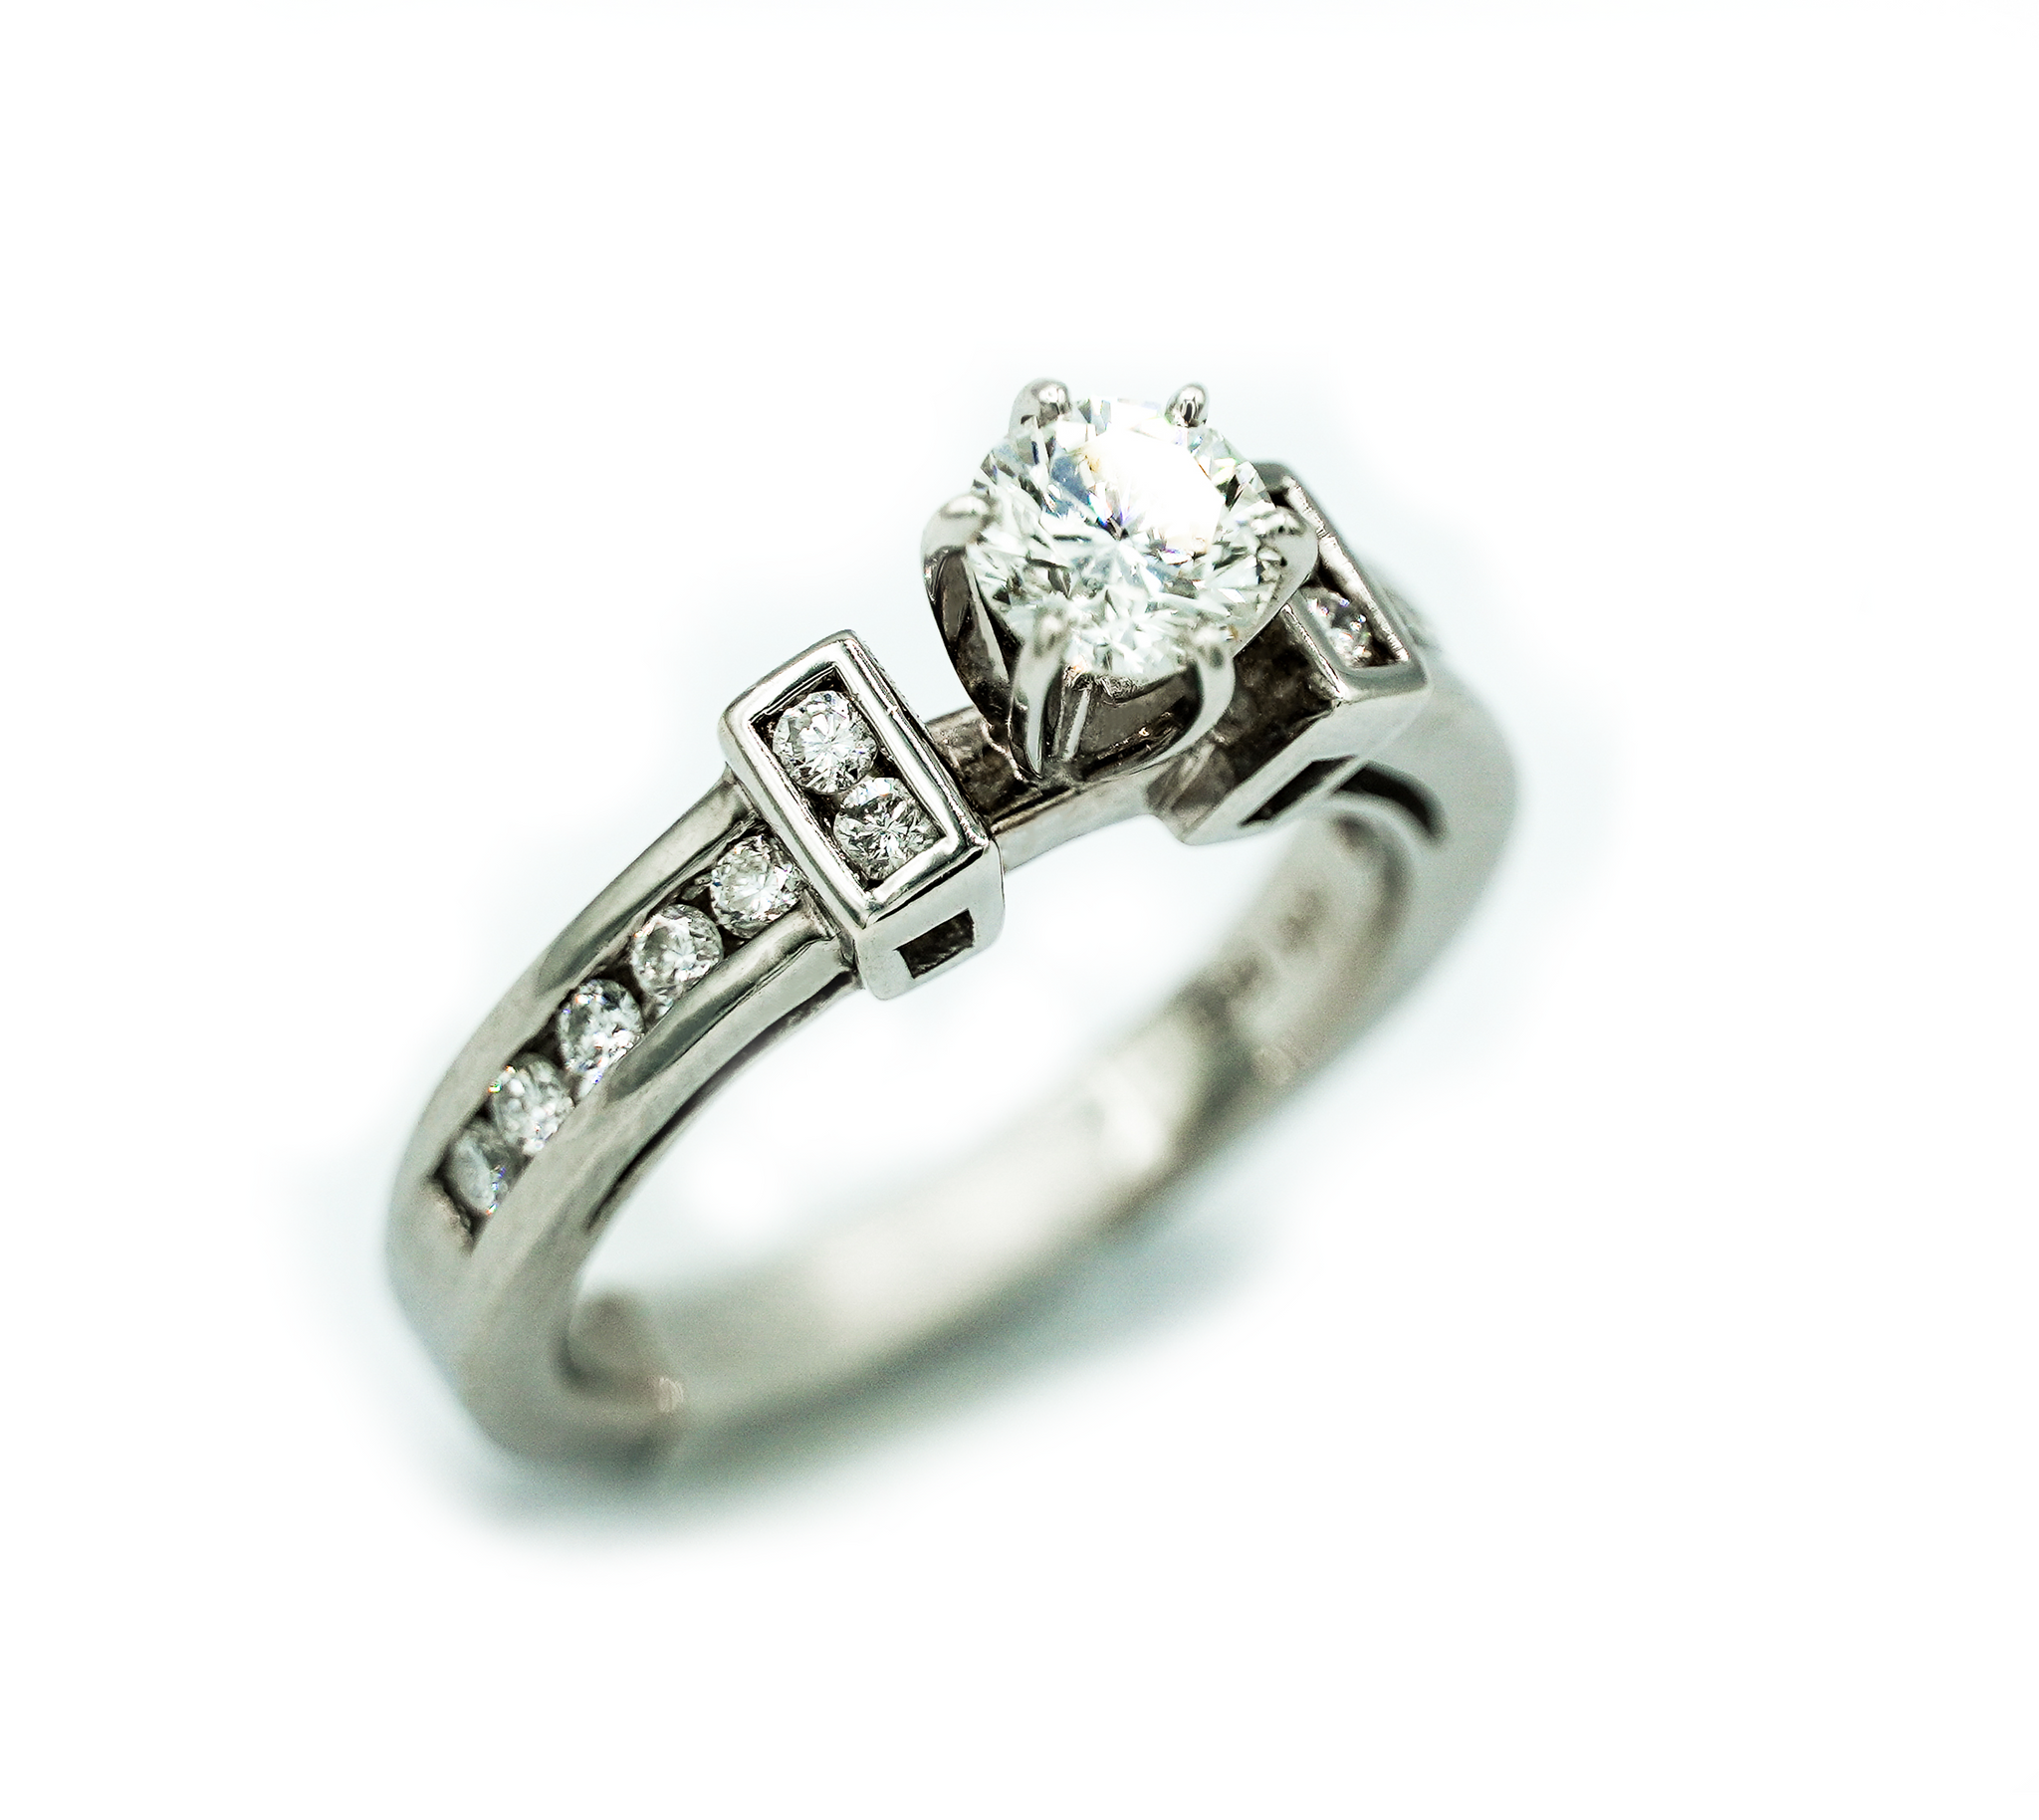 Montalvo Diamonds - Round Brilliant Cut Ring with Side Stones in 14kt White Gold